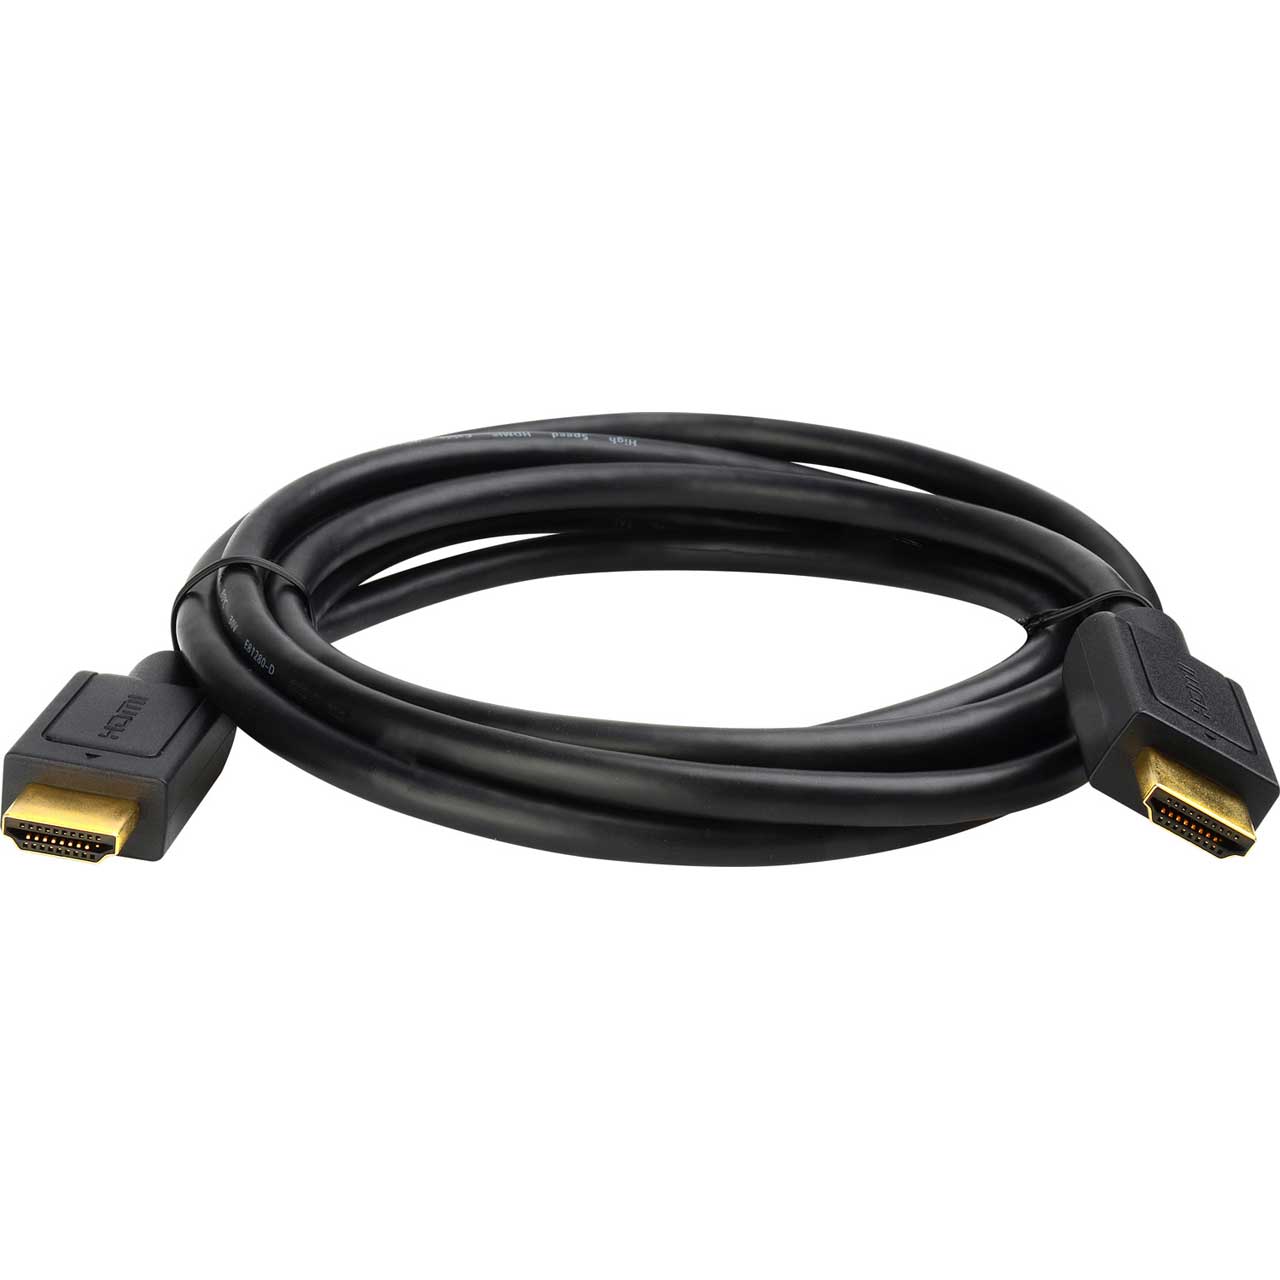 4K/2K HDMI Cable v1.4 Ethernet Type-A Male to Male - 3 Foot